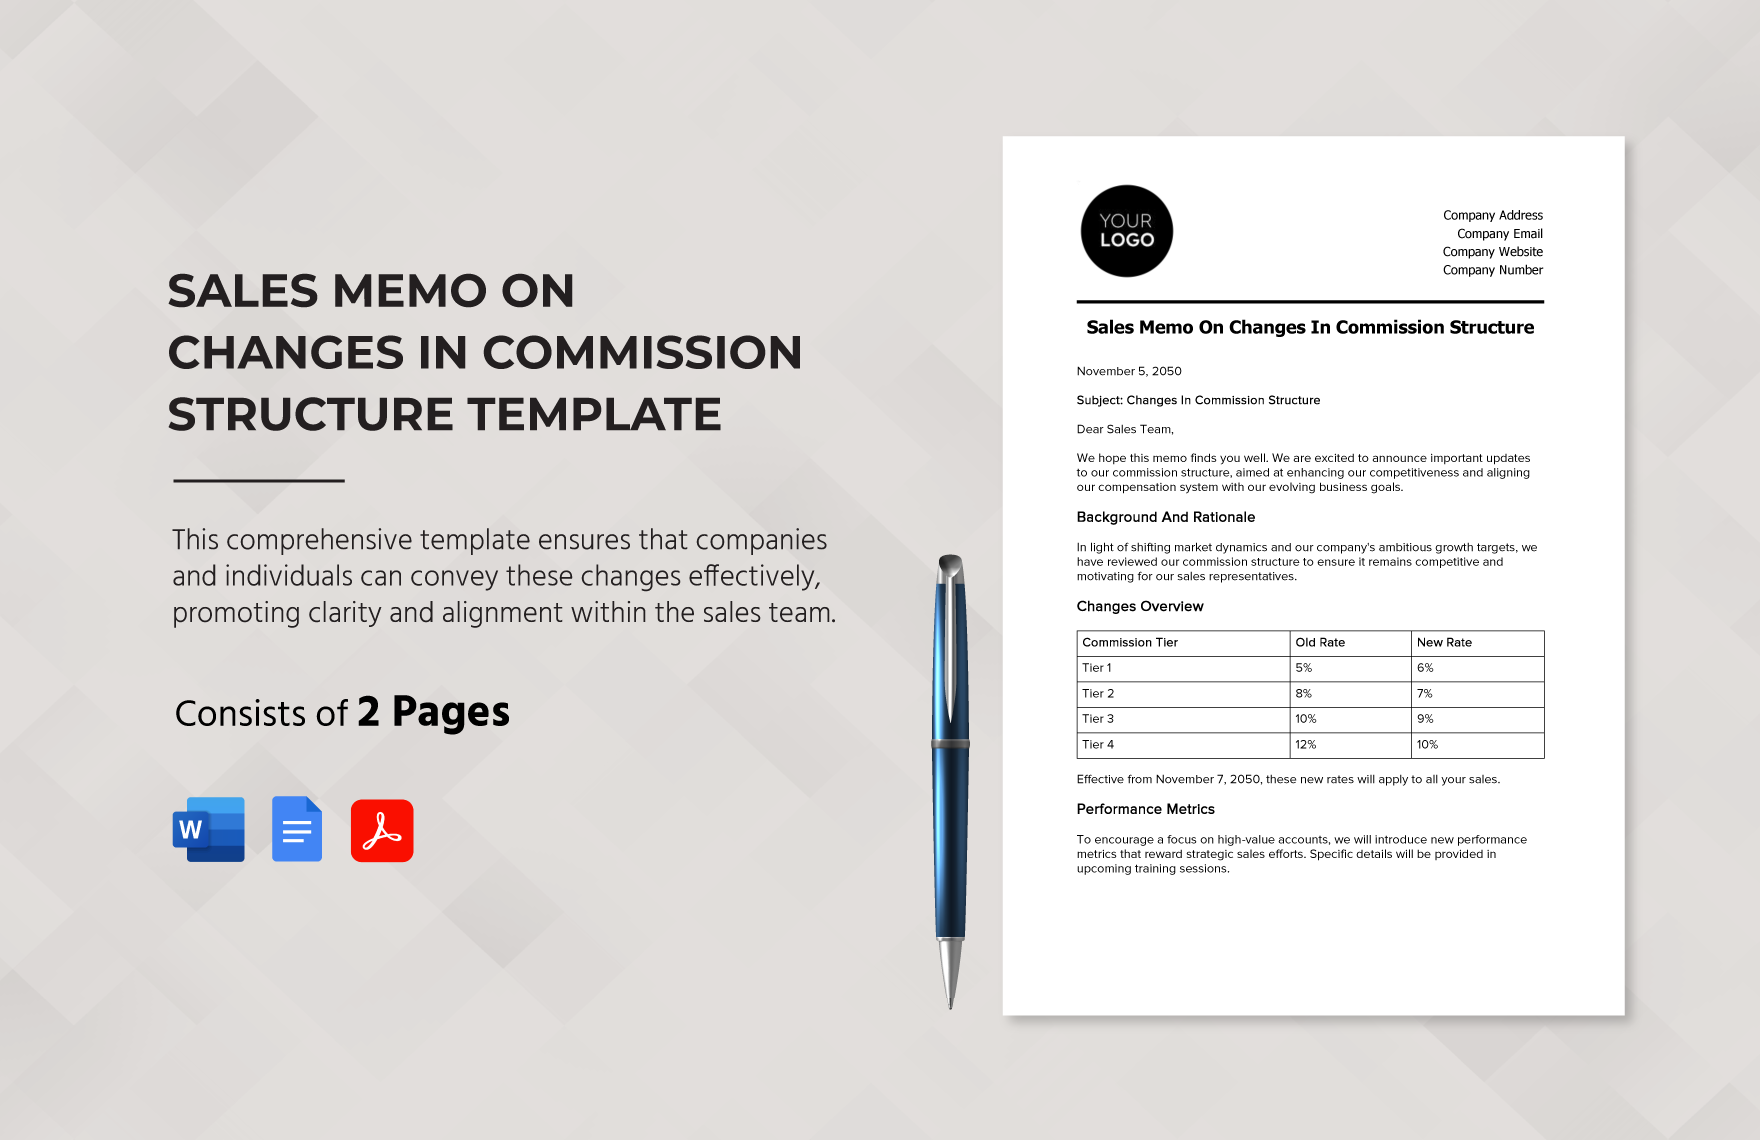 Sales Memo on Changes in Commission Structure Template